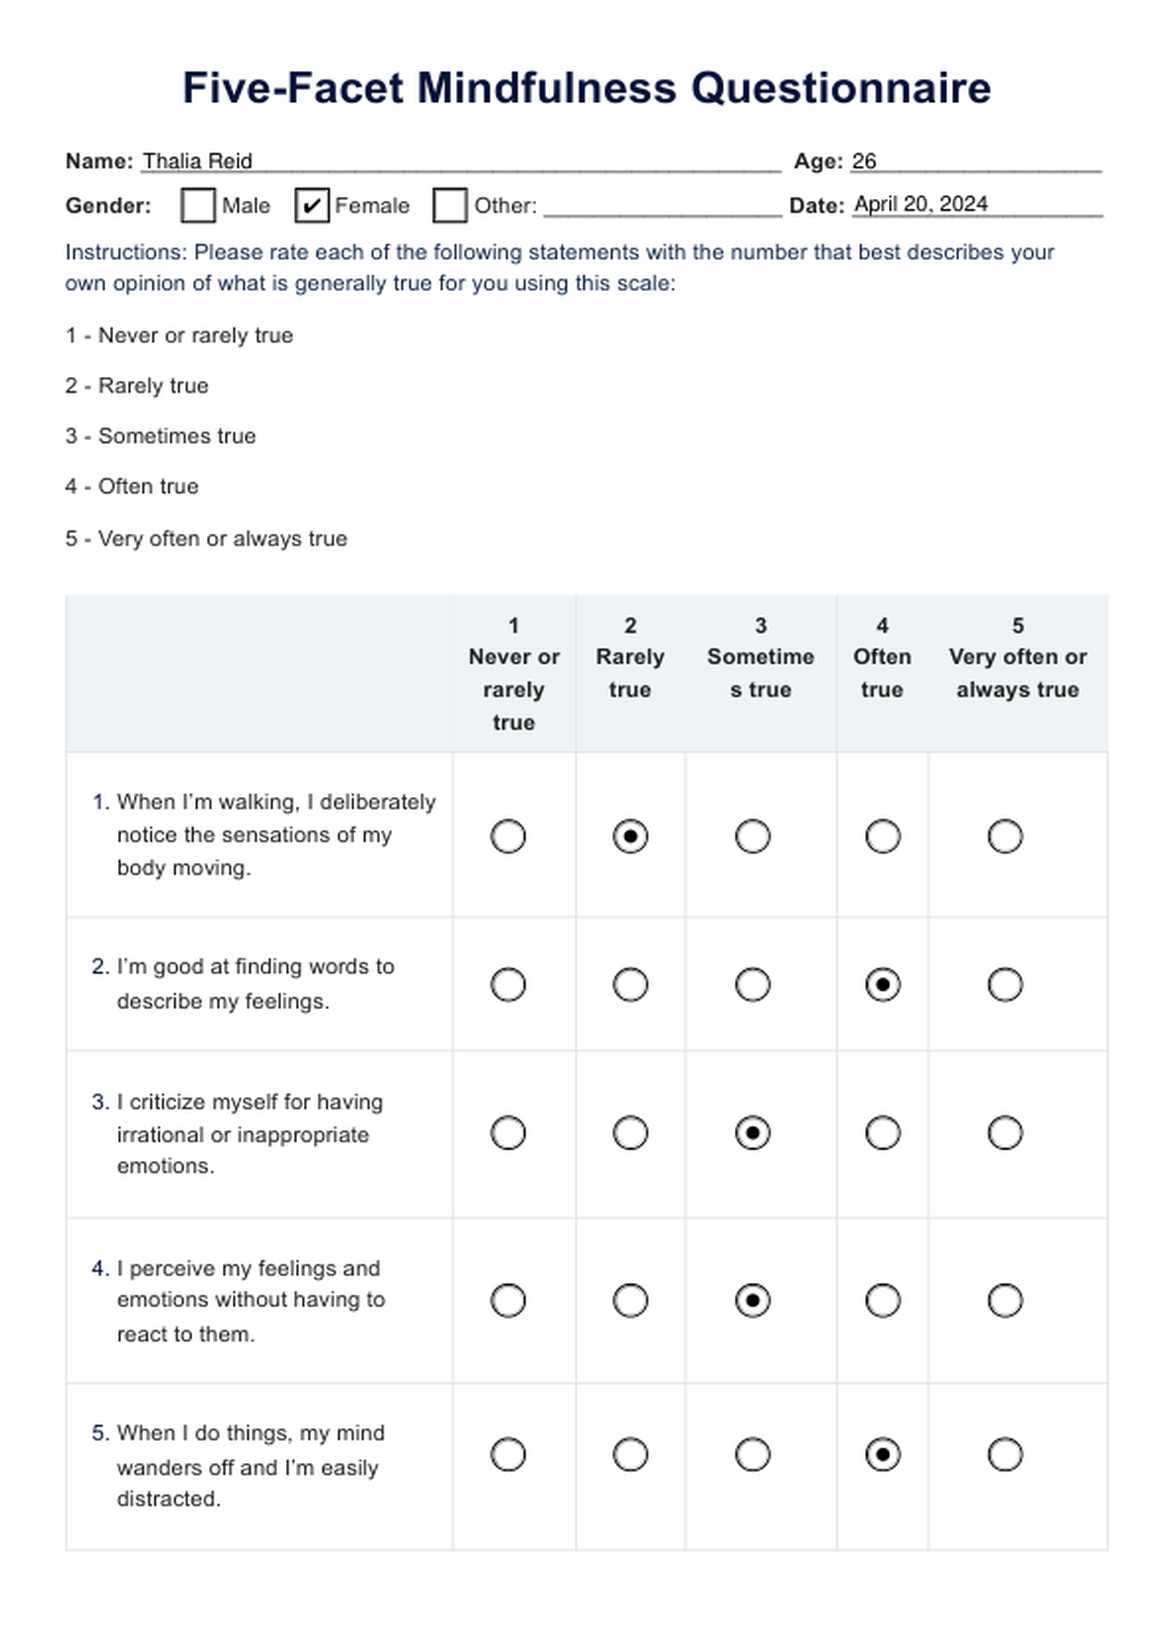 Five-Facet Mindfulness Questionnaire PDF Example